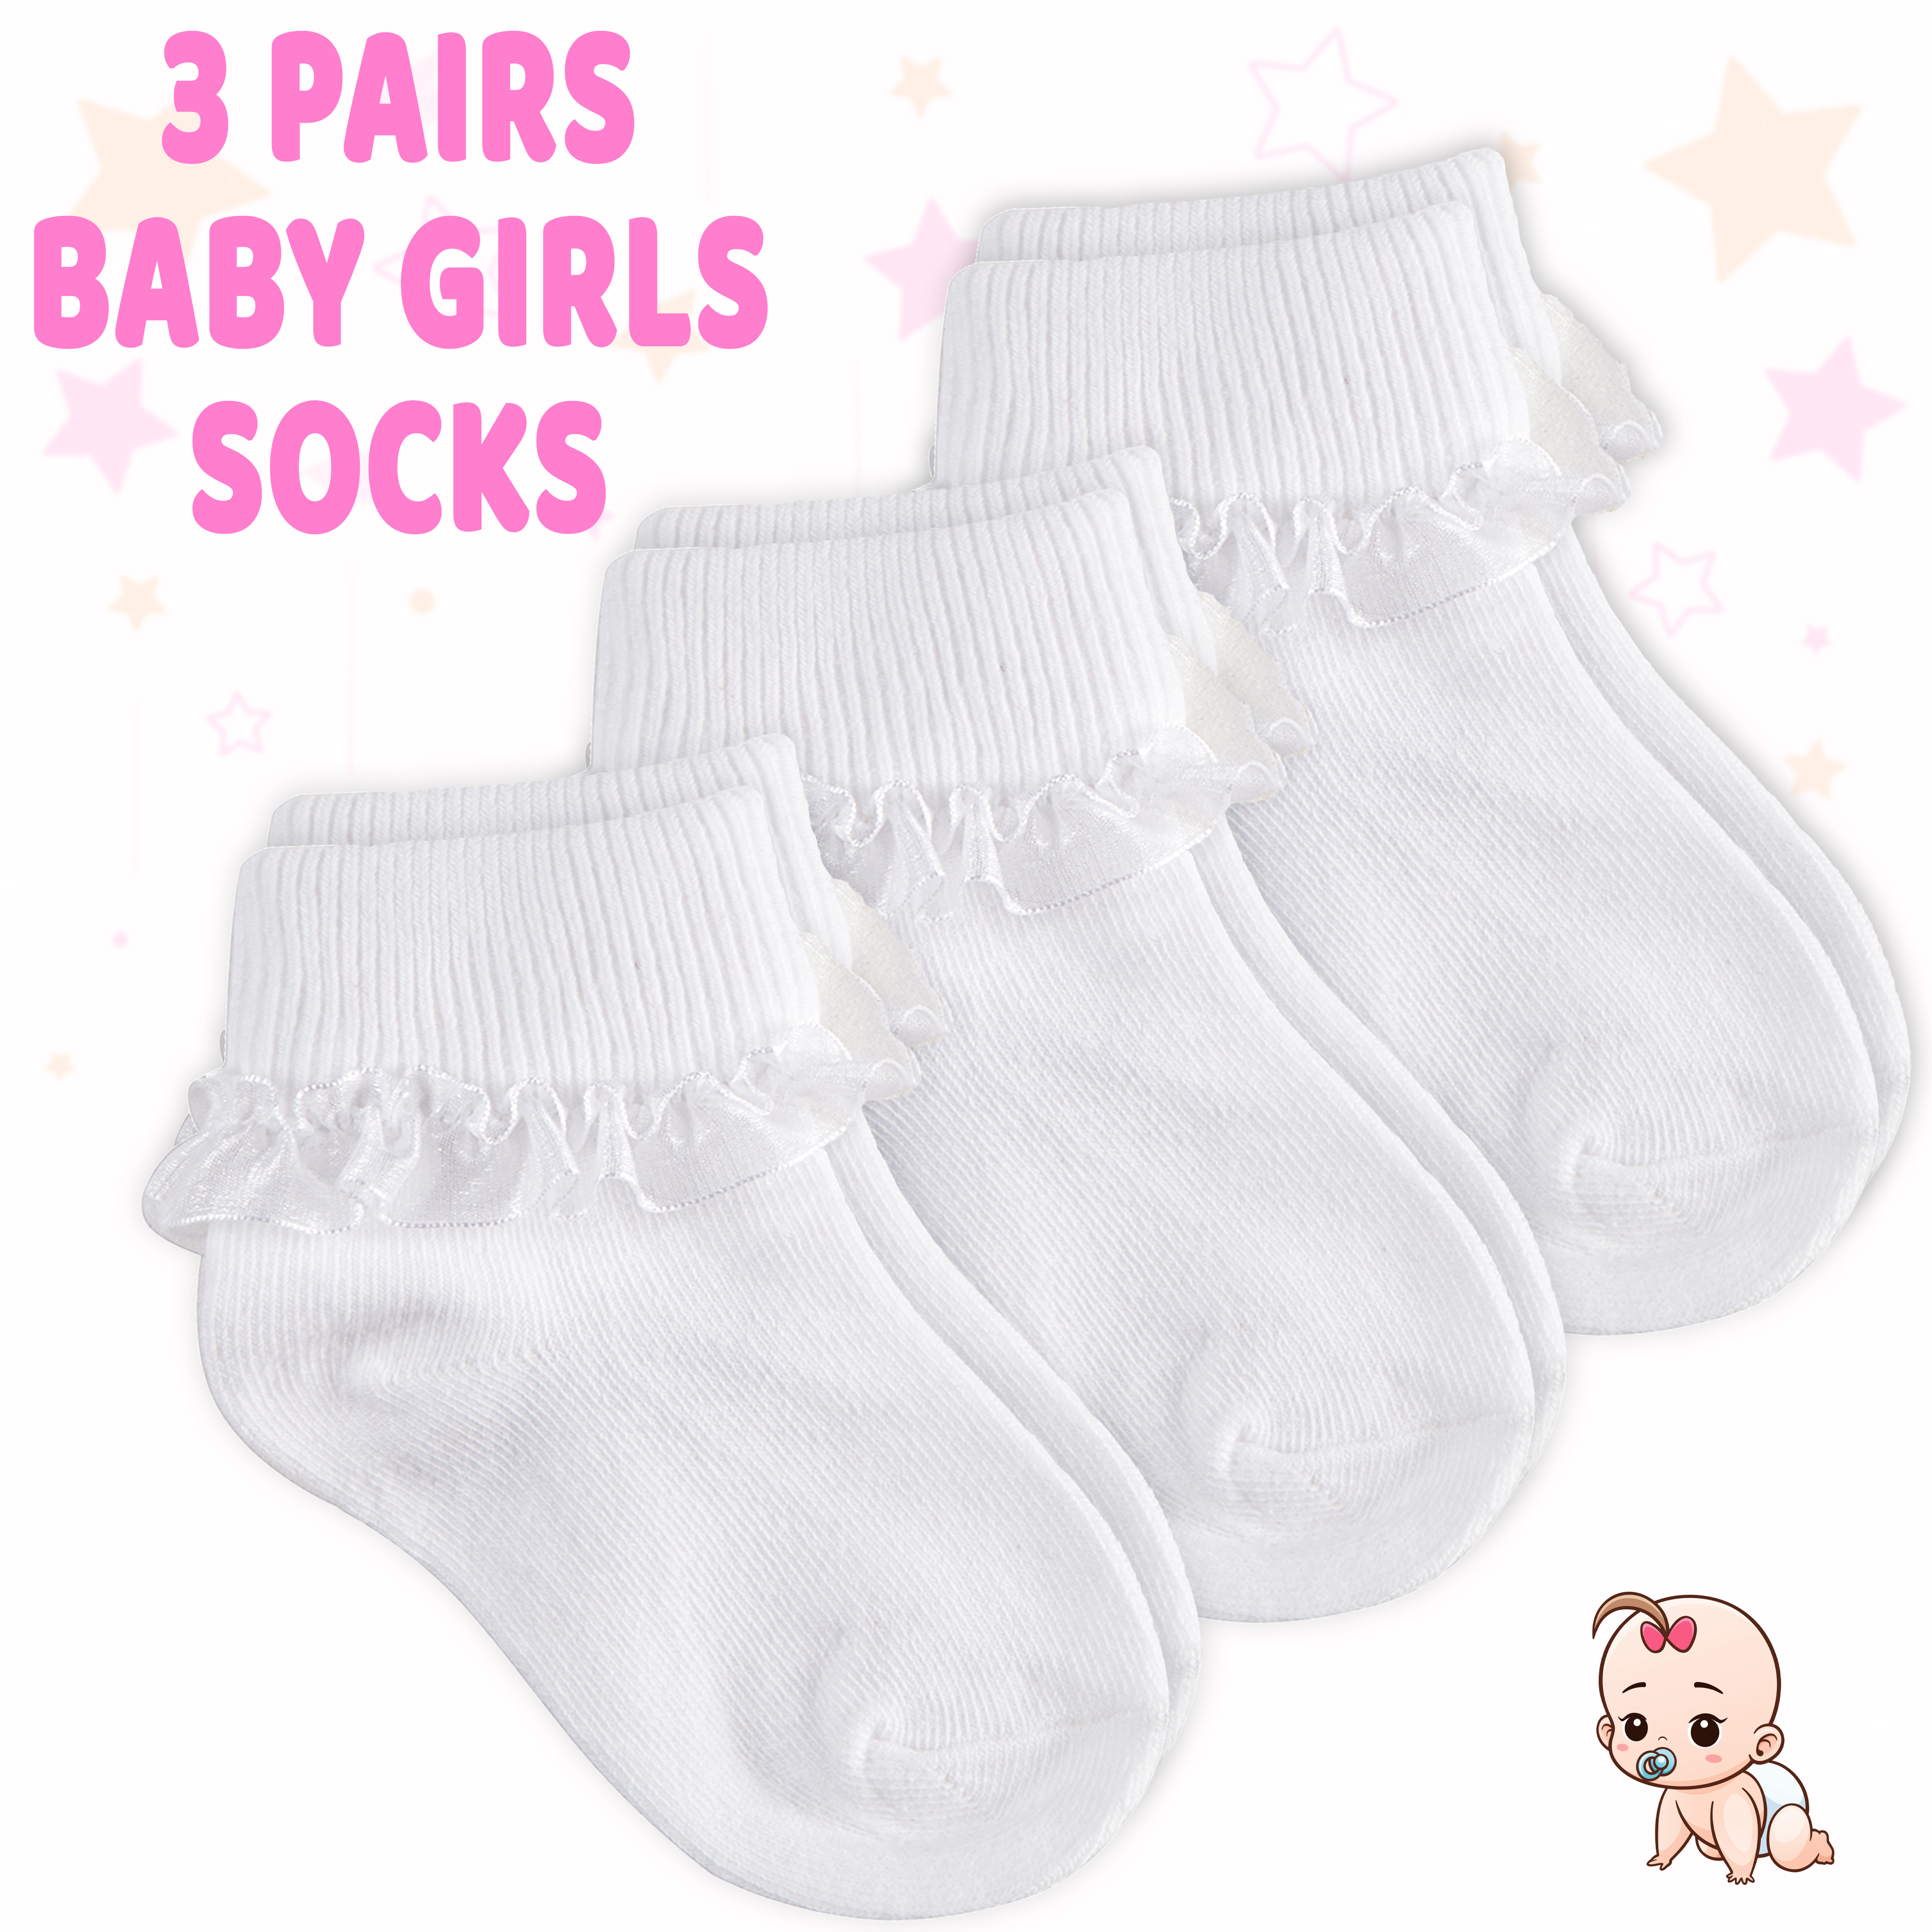 6 PAIR of GIRLS WHITE TURN OVER TOP ANKLE SOCKS Frilly Lace Trims 